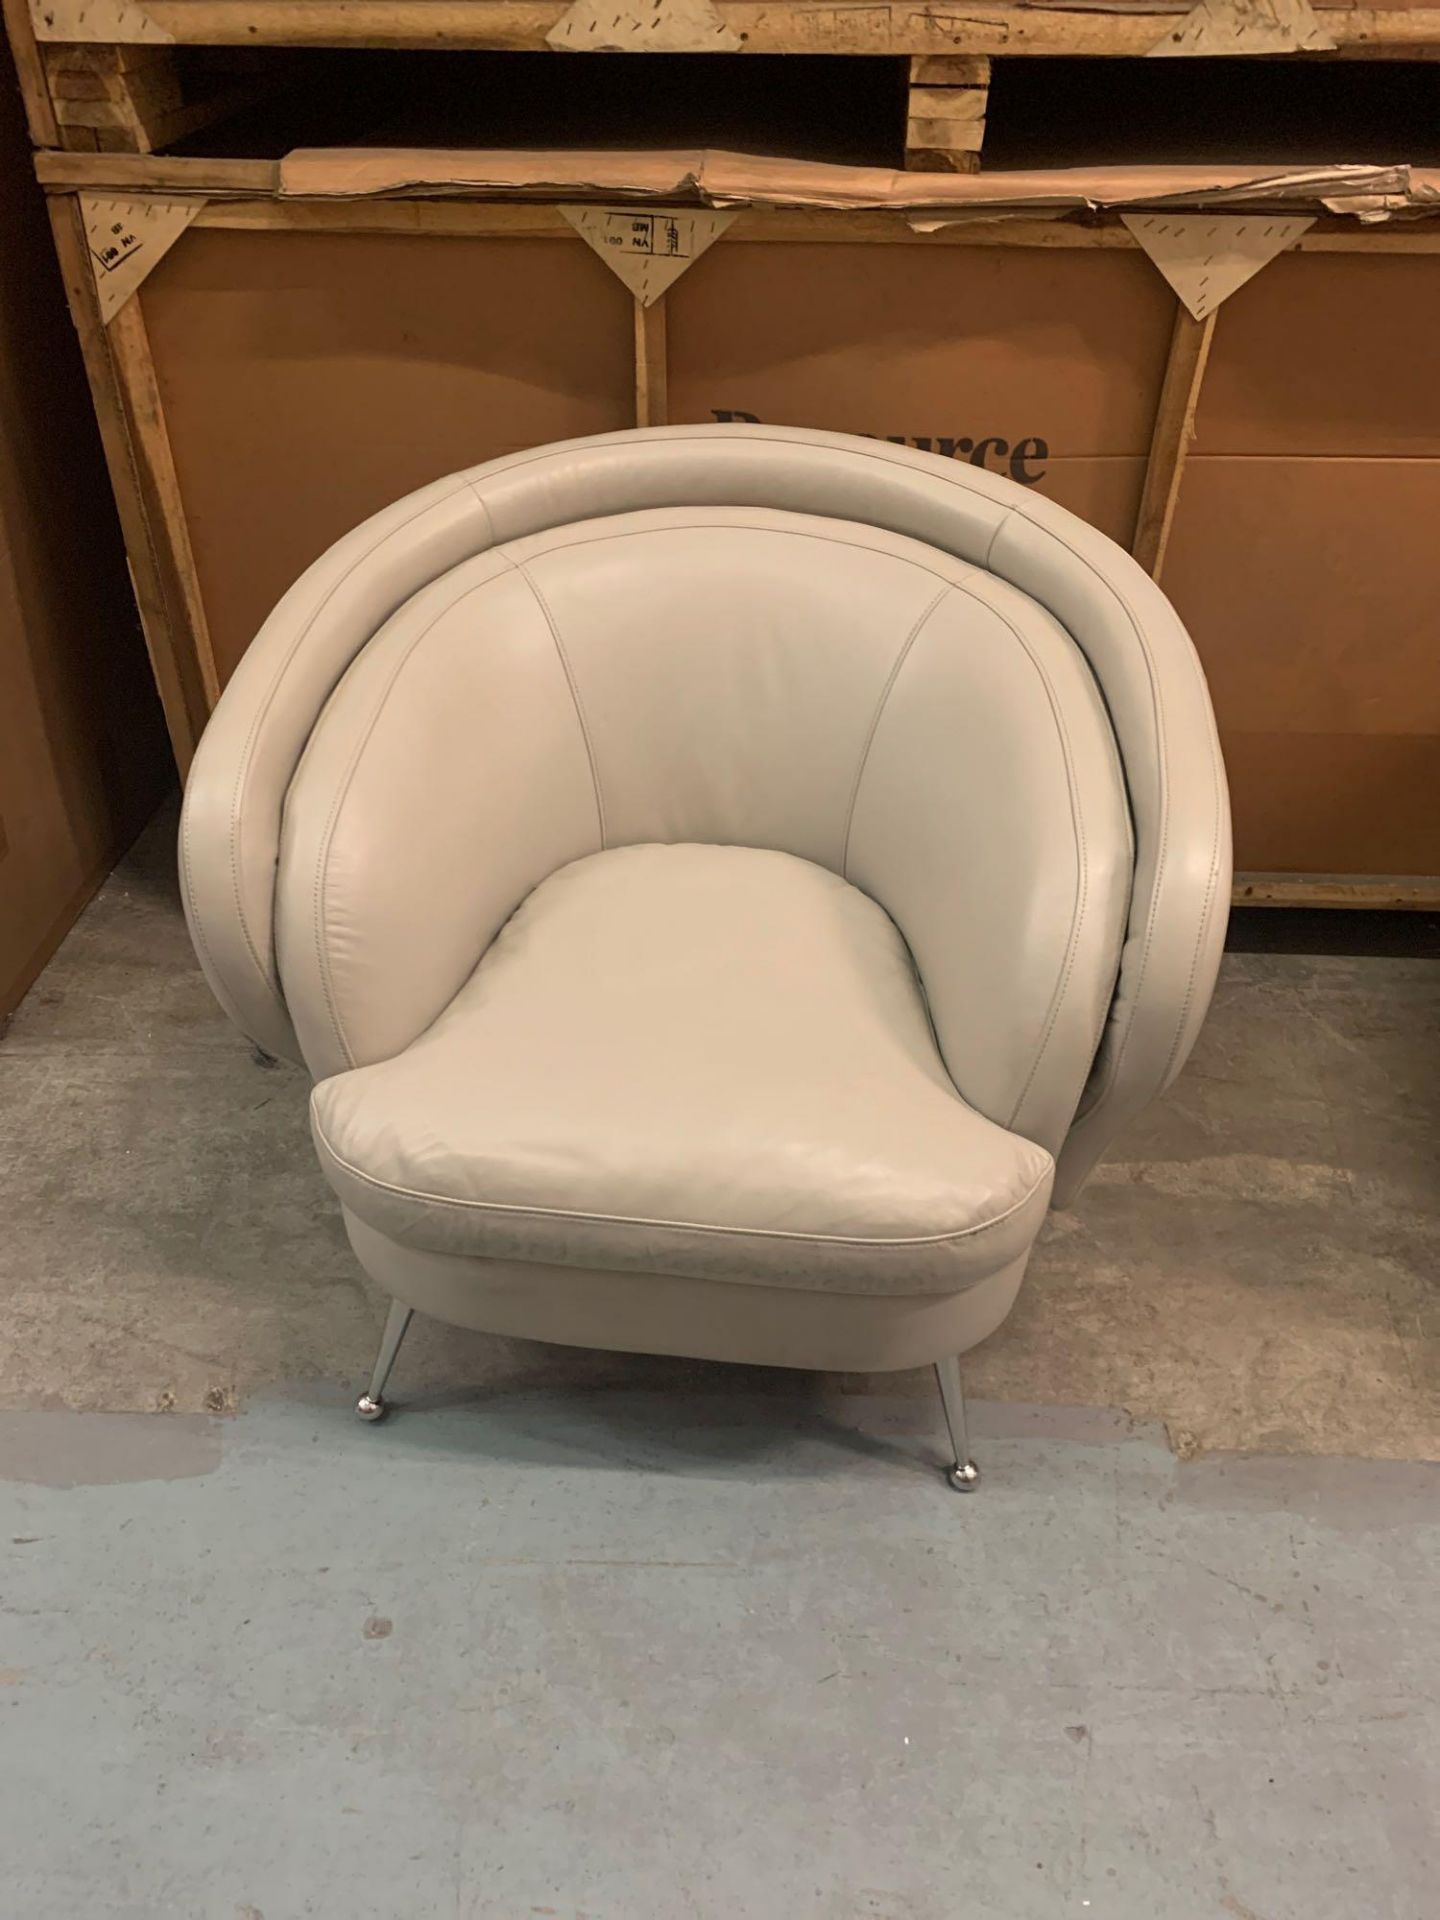 Tesoro Tub Chair Cream Full Leather The Tesoro Tub Chair Is The Latest Addition To Our Range Of - Image 6 of 7